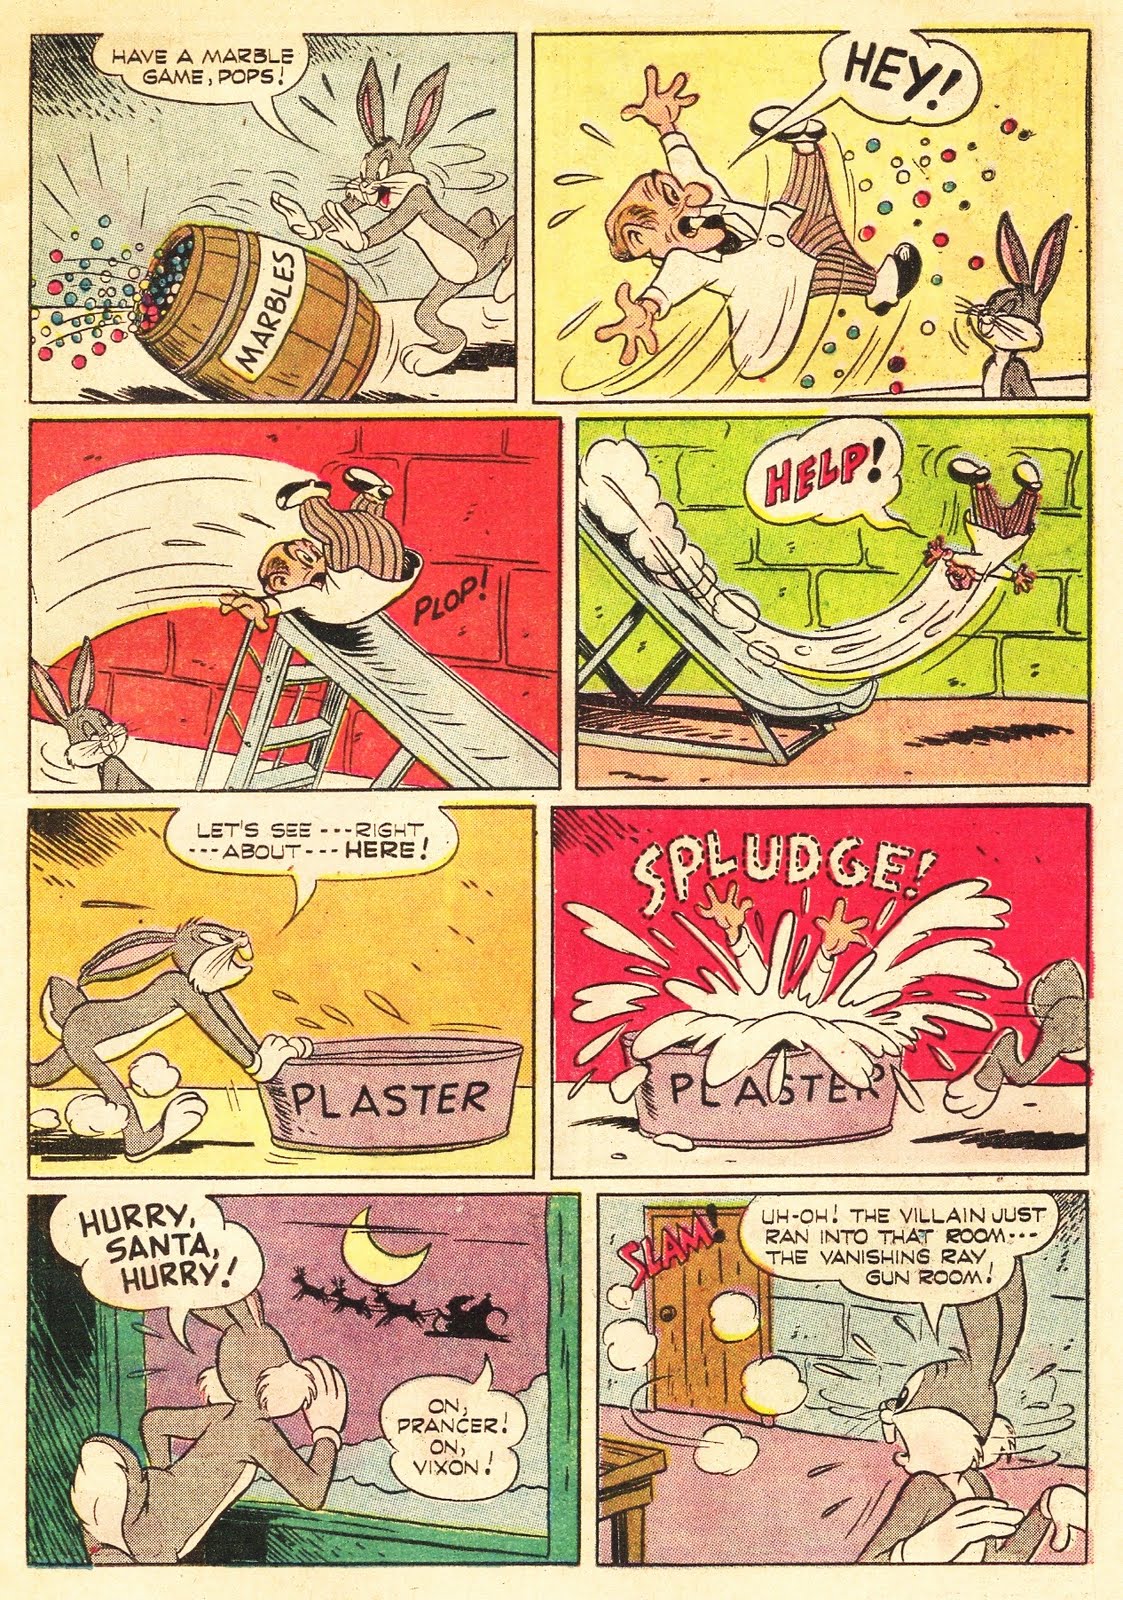 Bugs Bunny Issue 109 Read Bugs Bunny Issue 109 Comic Online In High